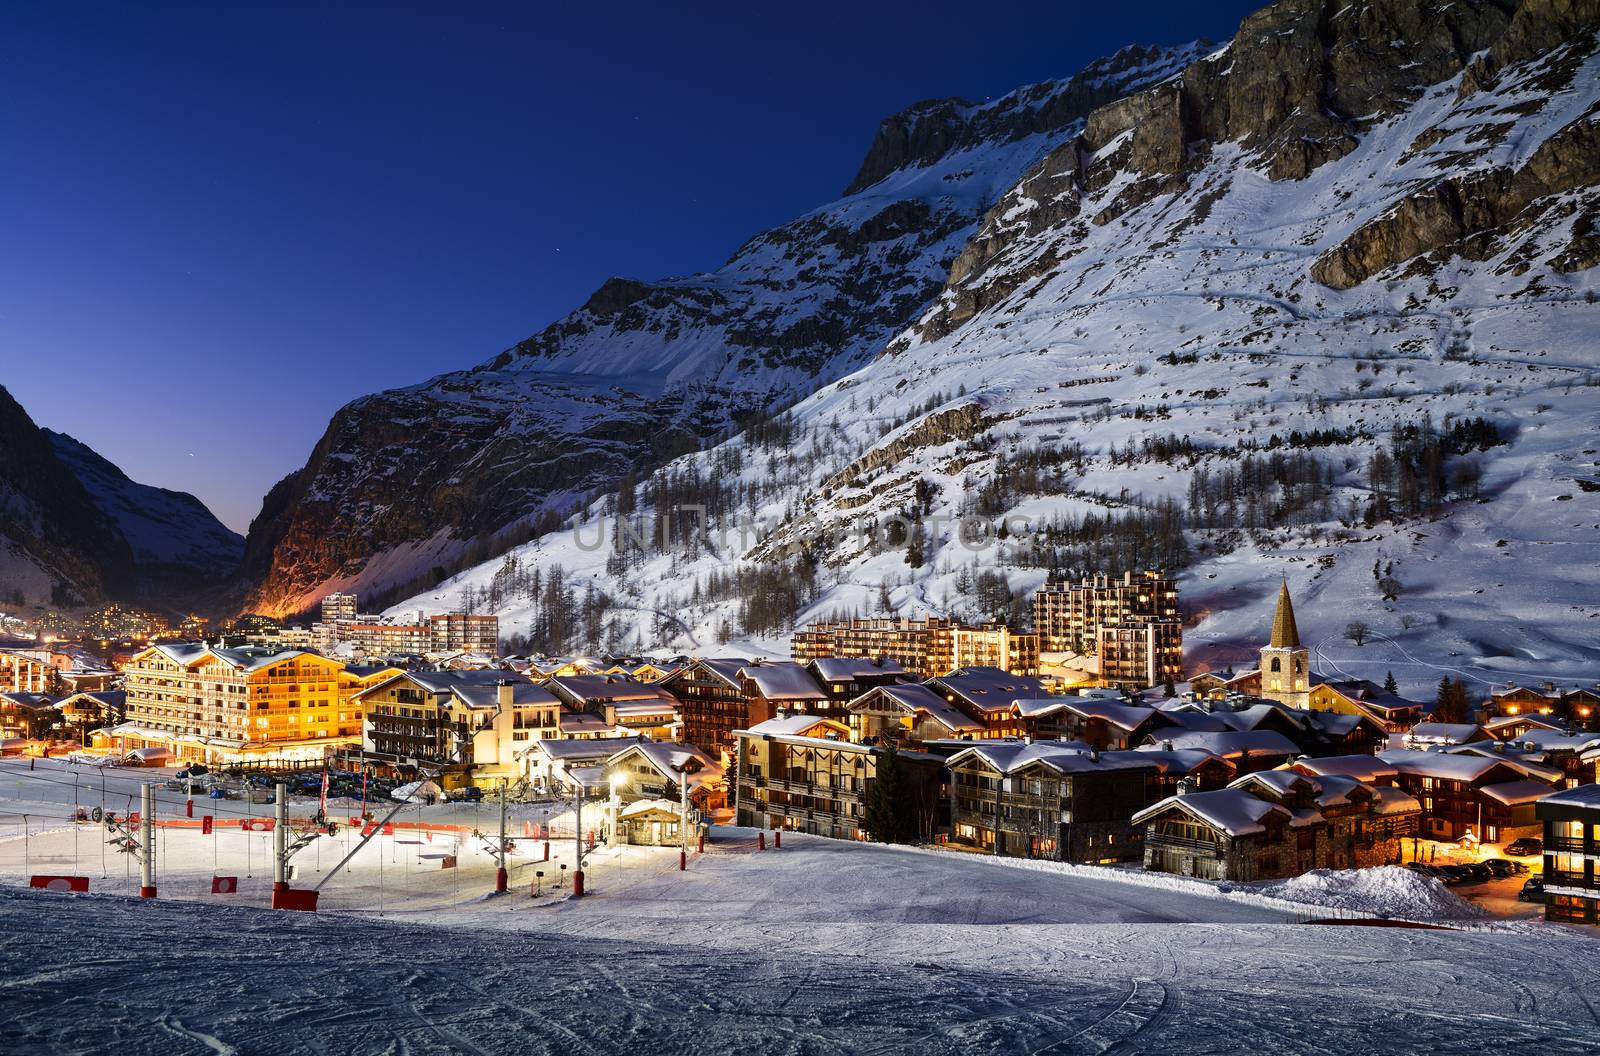 Famous and luxury place of Val d'Isere at sunset, Tarentaise, Alps, France